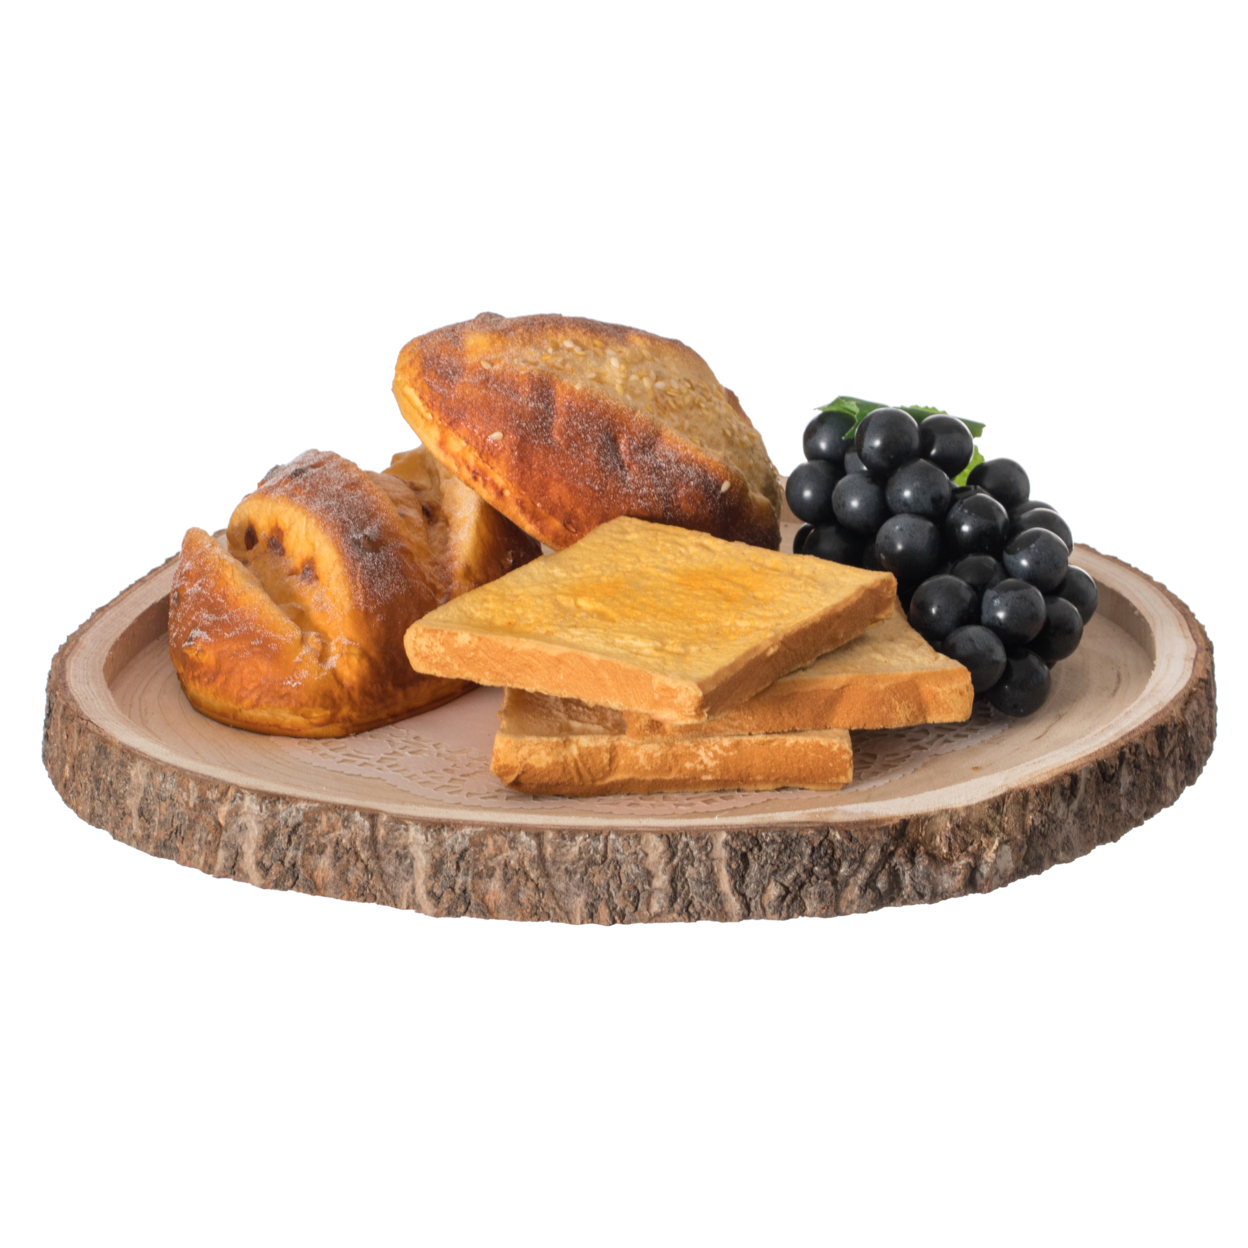 Natural Wooden Bark Round Slice Tray, Rustic Table Charger Centerpiece - 16